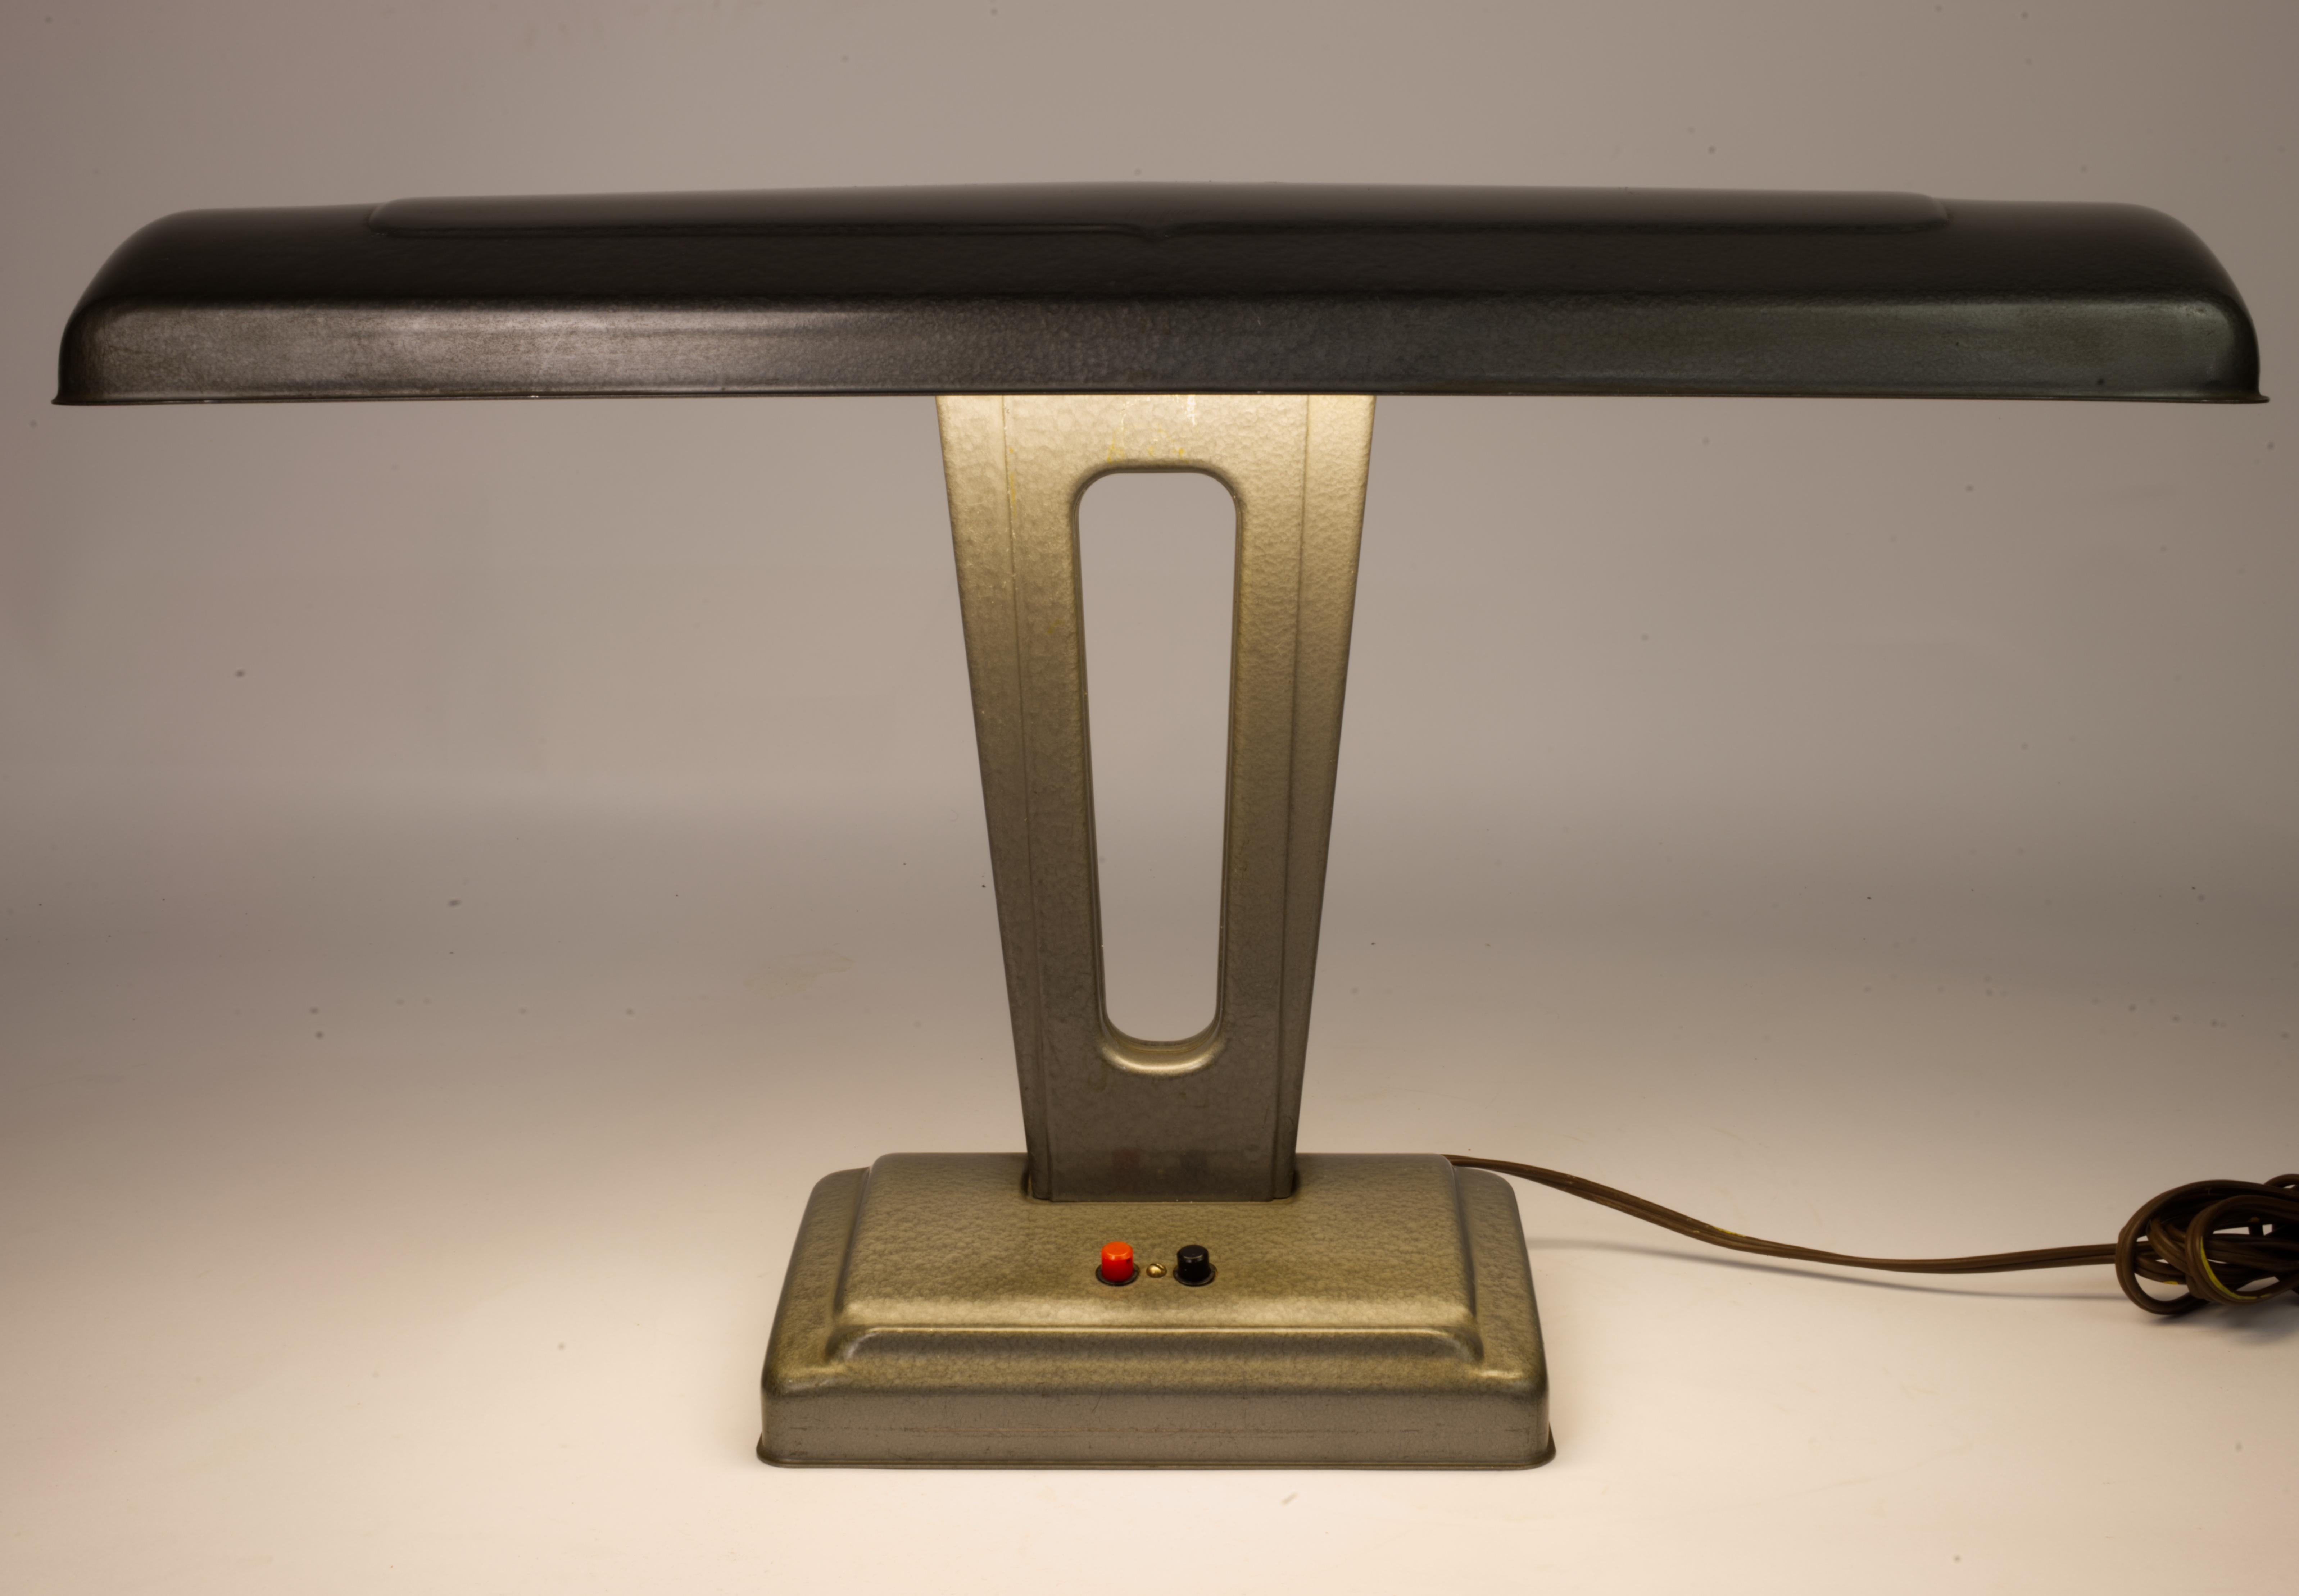 Art Deco revival desk lamp produced around 1950s. 
Lovely design. Lamp housing shape is reminiscent of Glenn H Curtiss early planes. Whoever designed it must have been a fan. 
Both lights work. As with majority of florescent lights, it emits a very